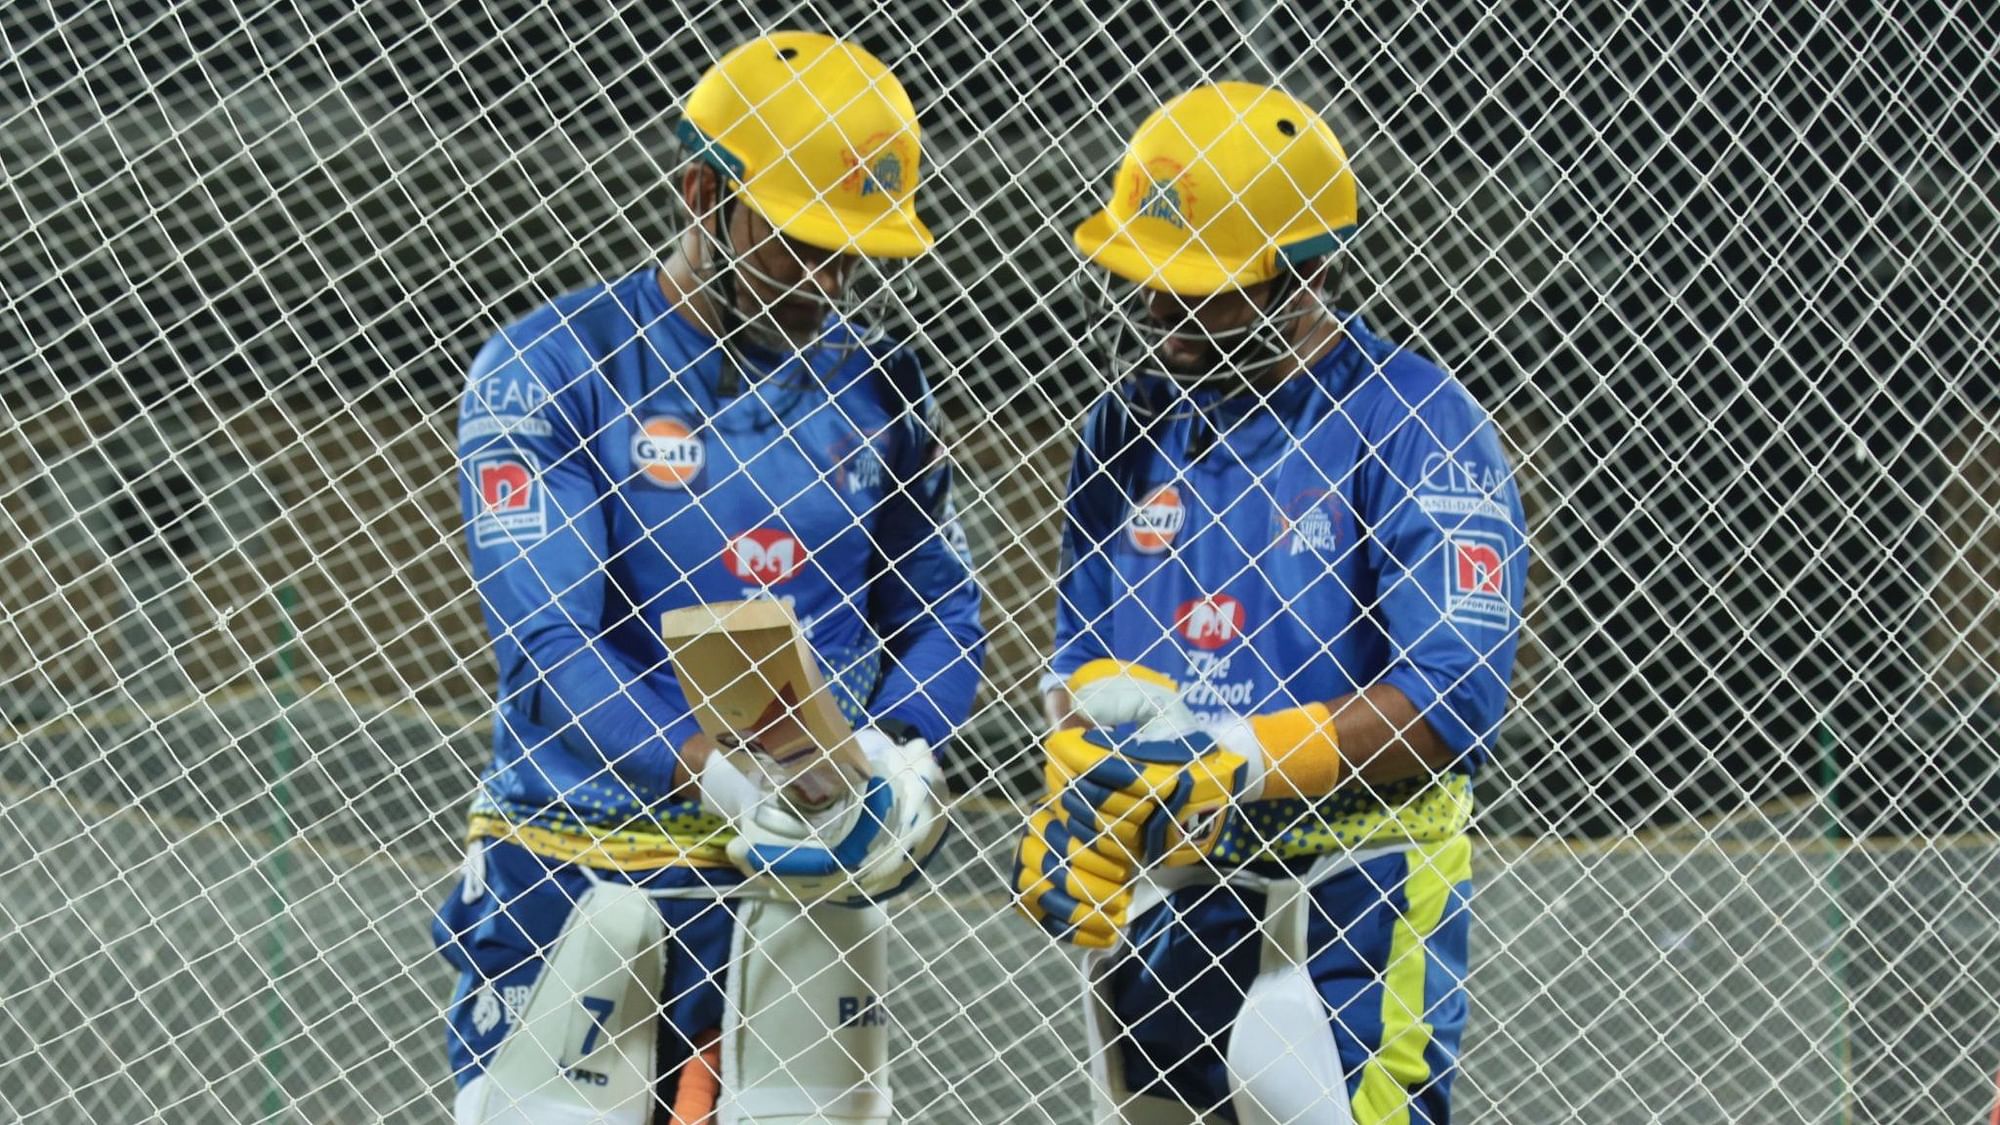 hree-time winners Chennai Super Kings had suspended their camp on Saturday.